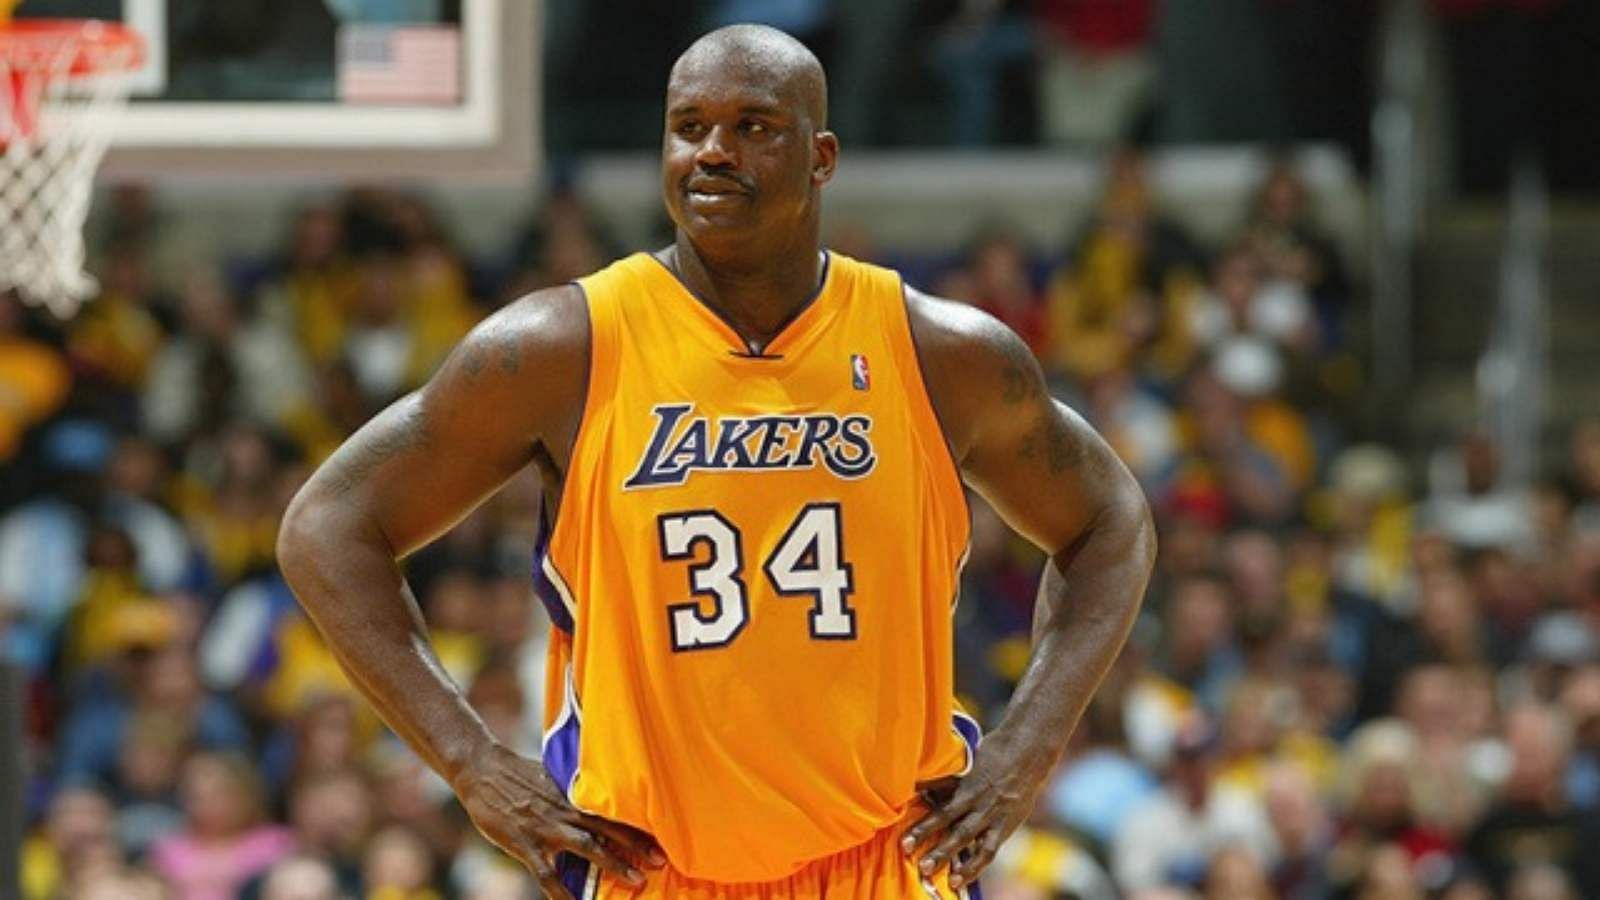 Shaquille O'Neal - Dunk Compilation LA 